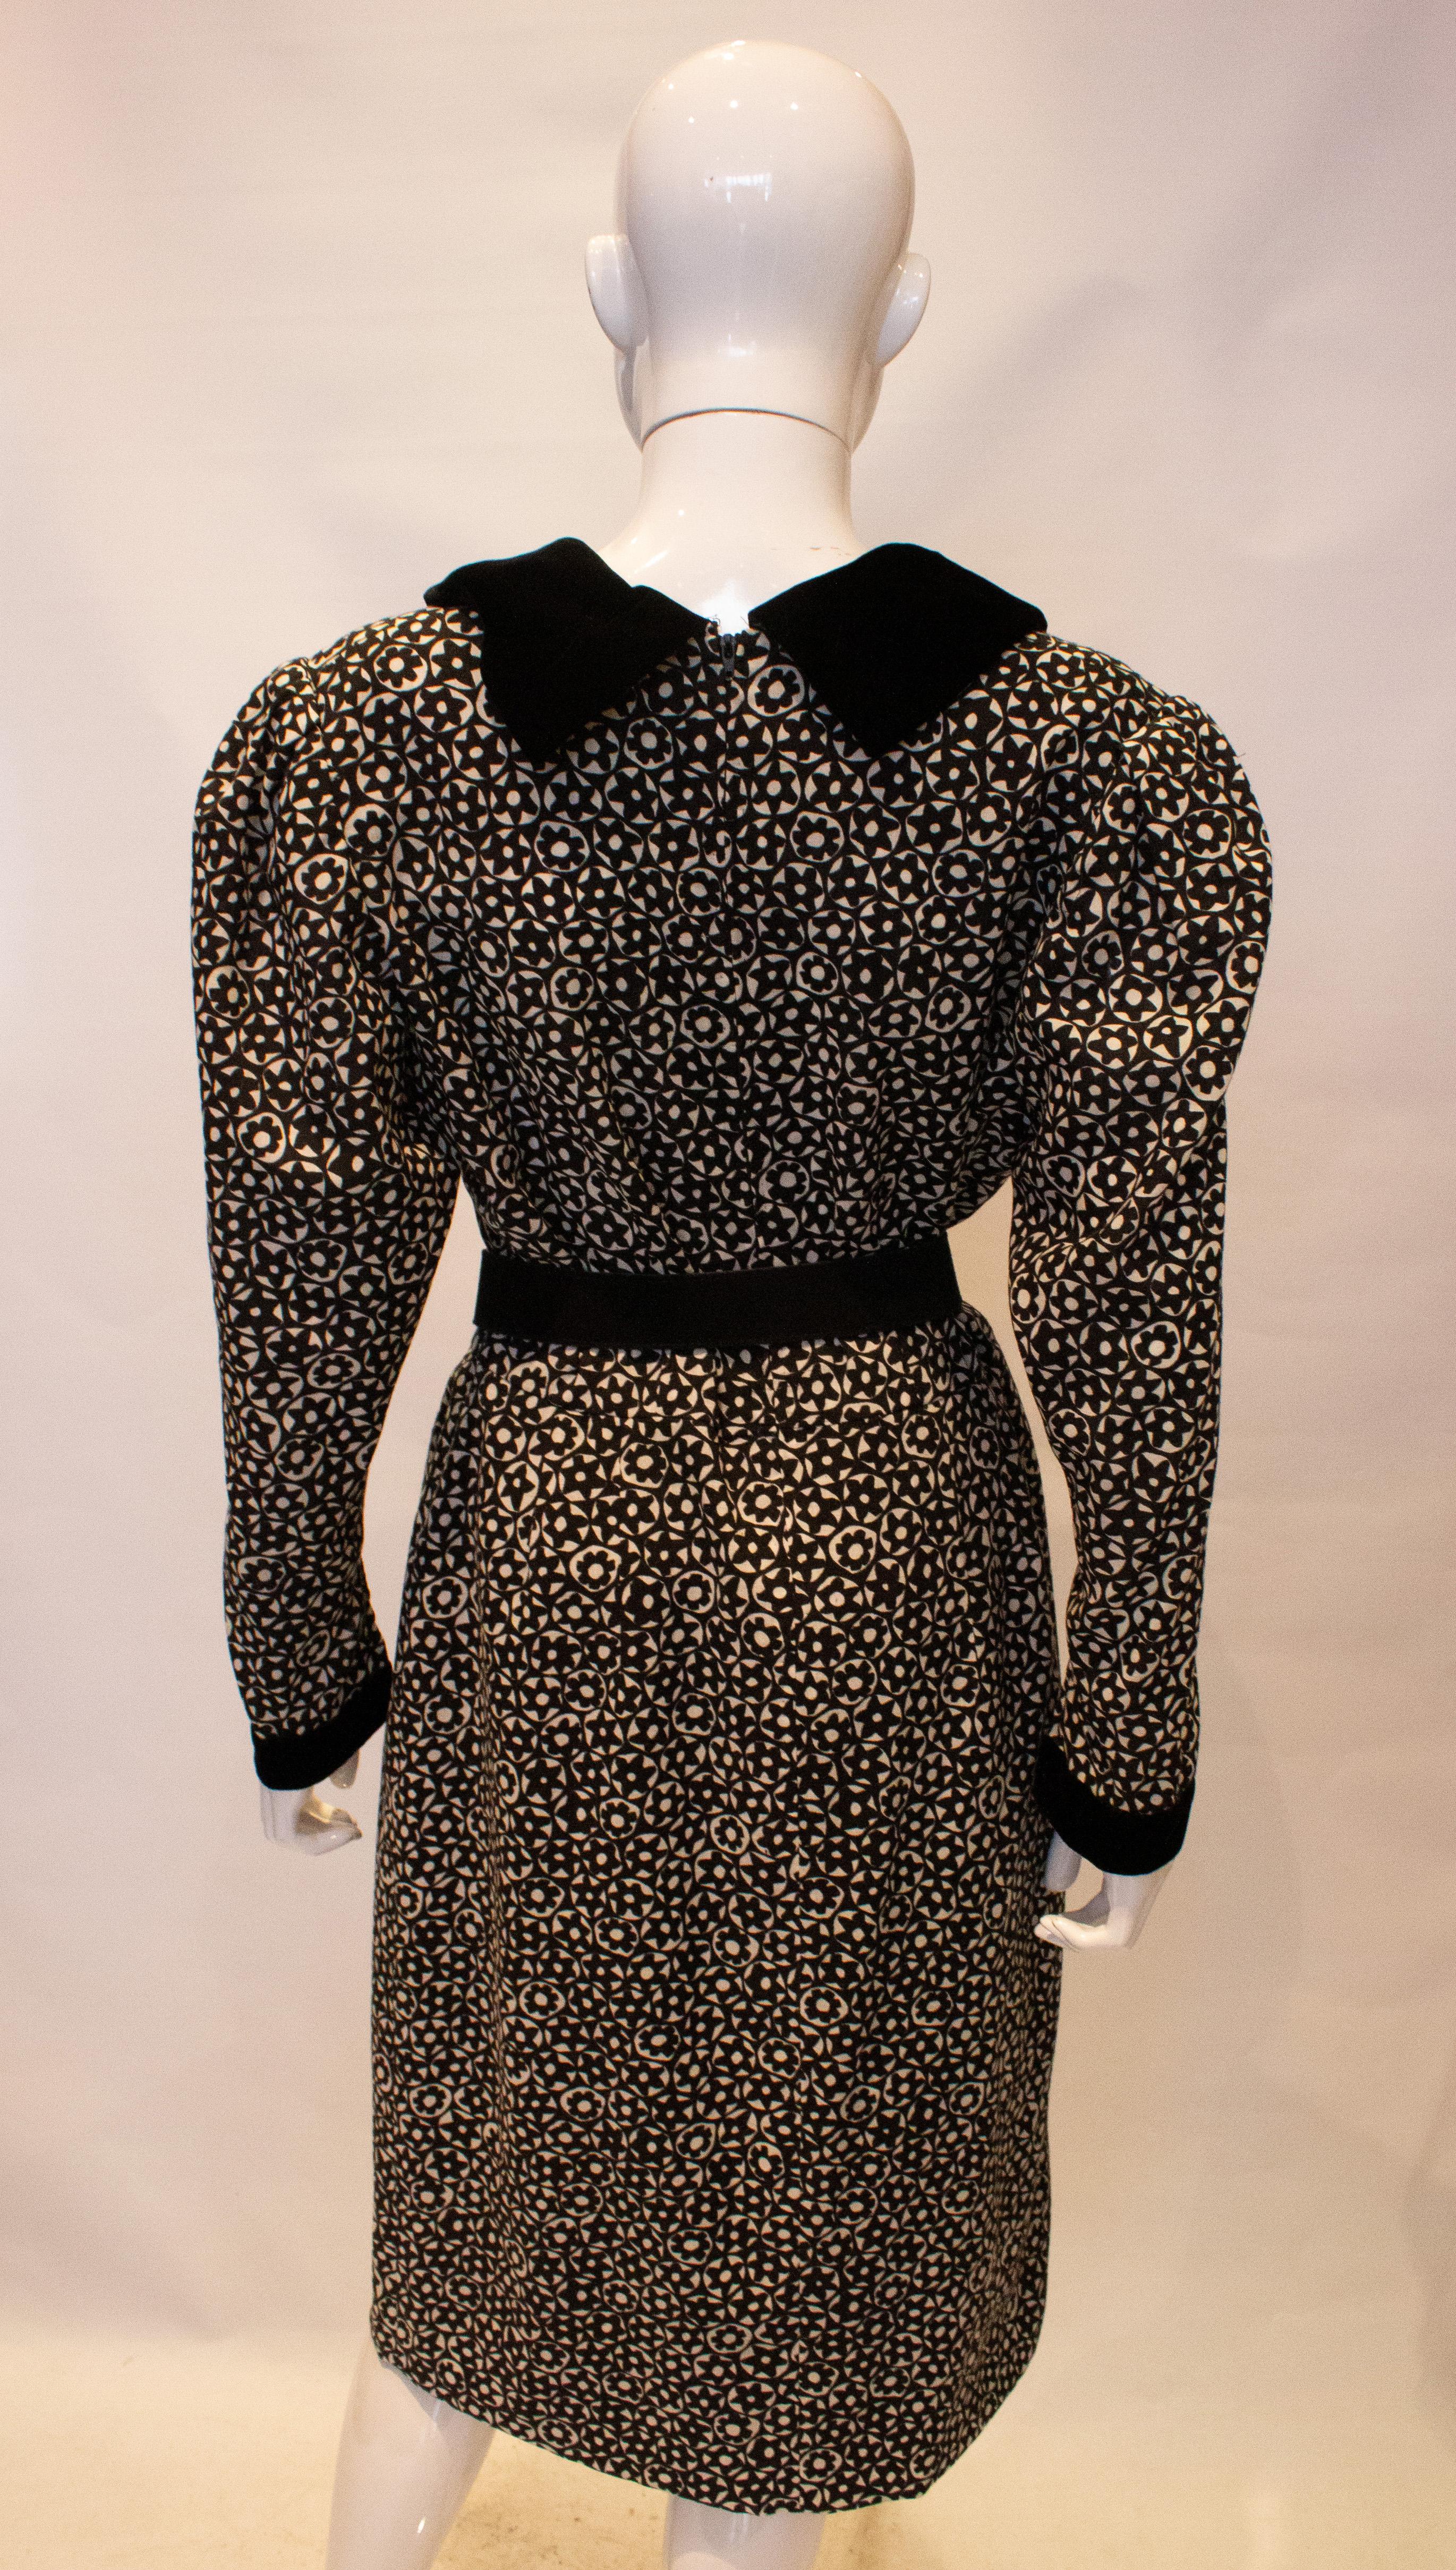 Vintage Donald Campbell Black and White Dress In Good Condition For Sale In London, GB